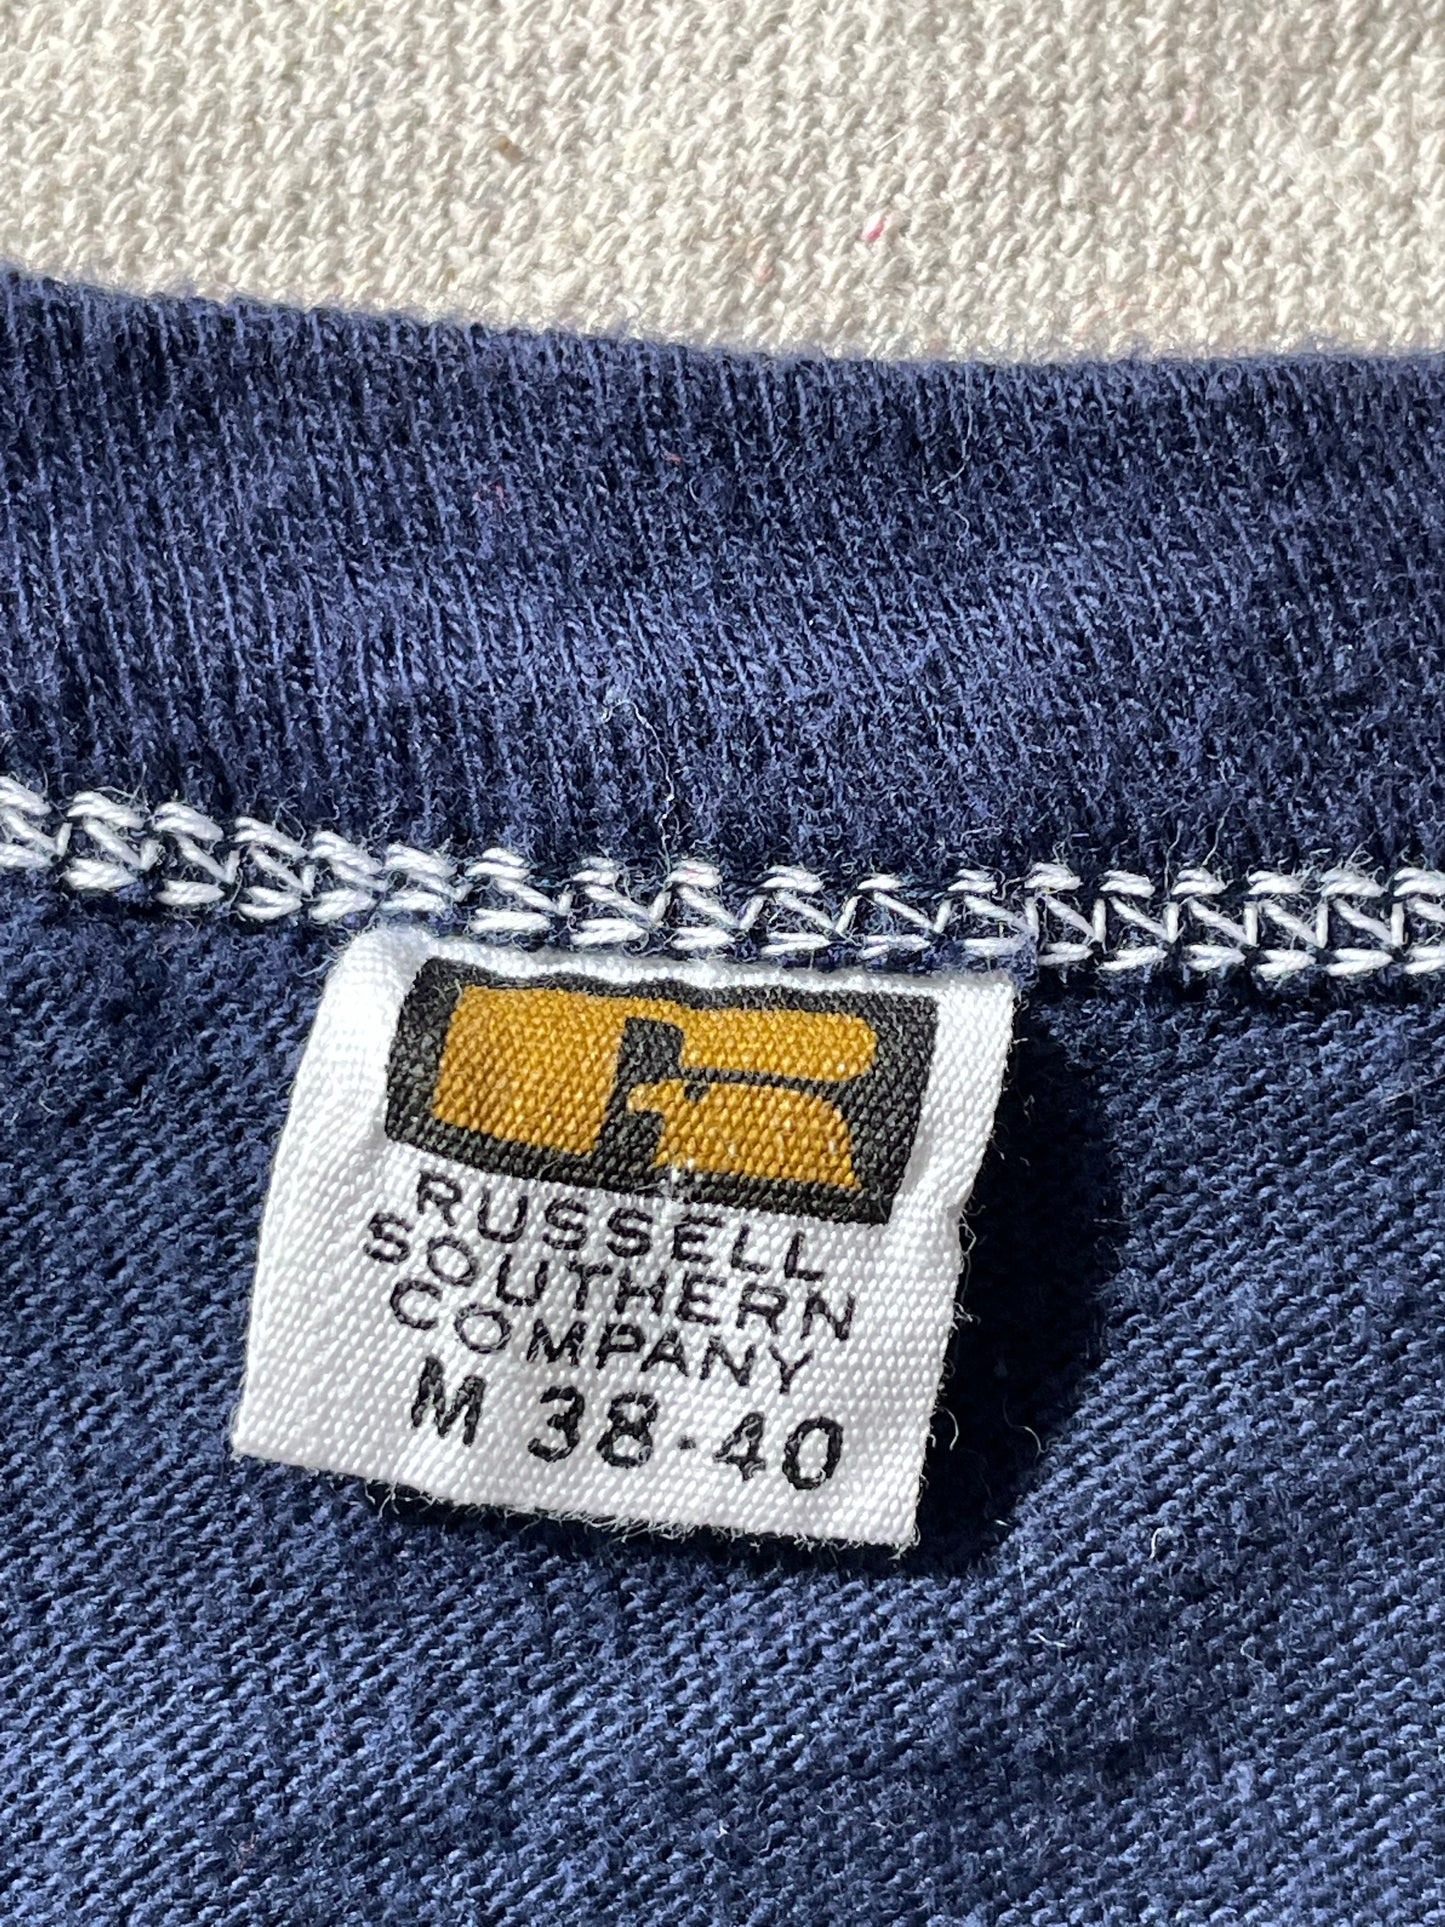 60s Russell Southern Co Repubco Raiders Tee